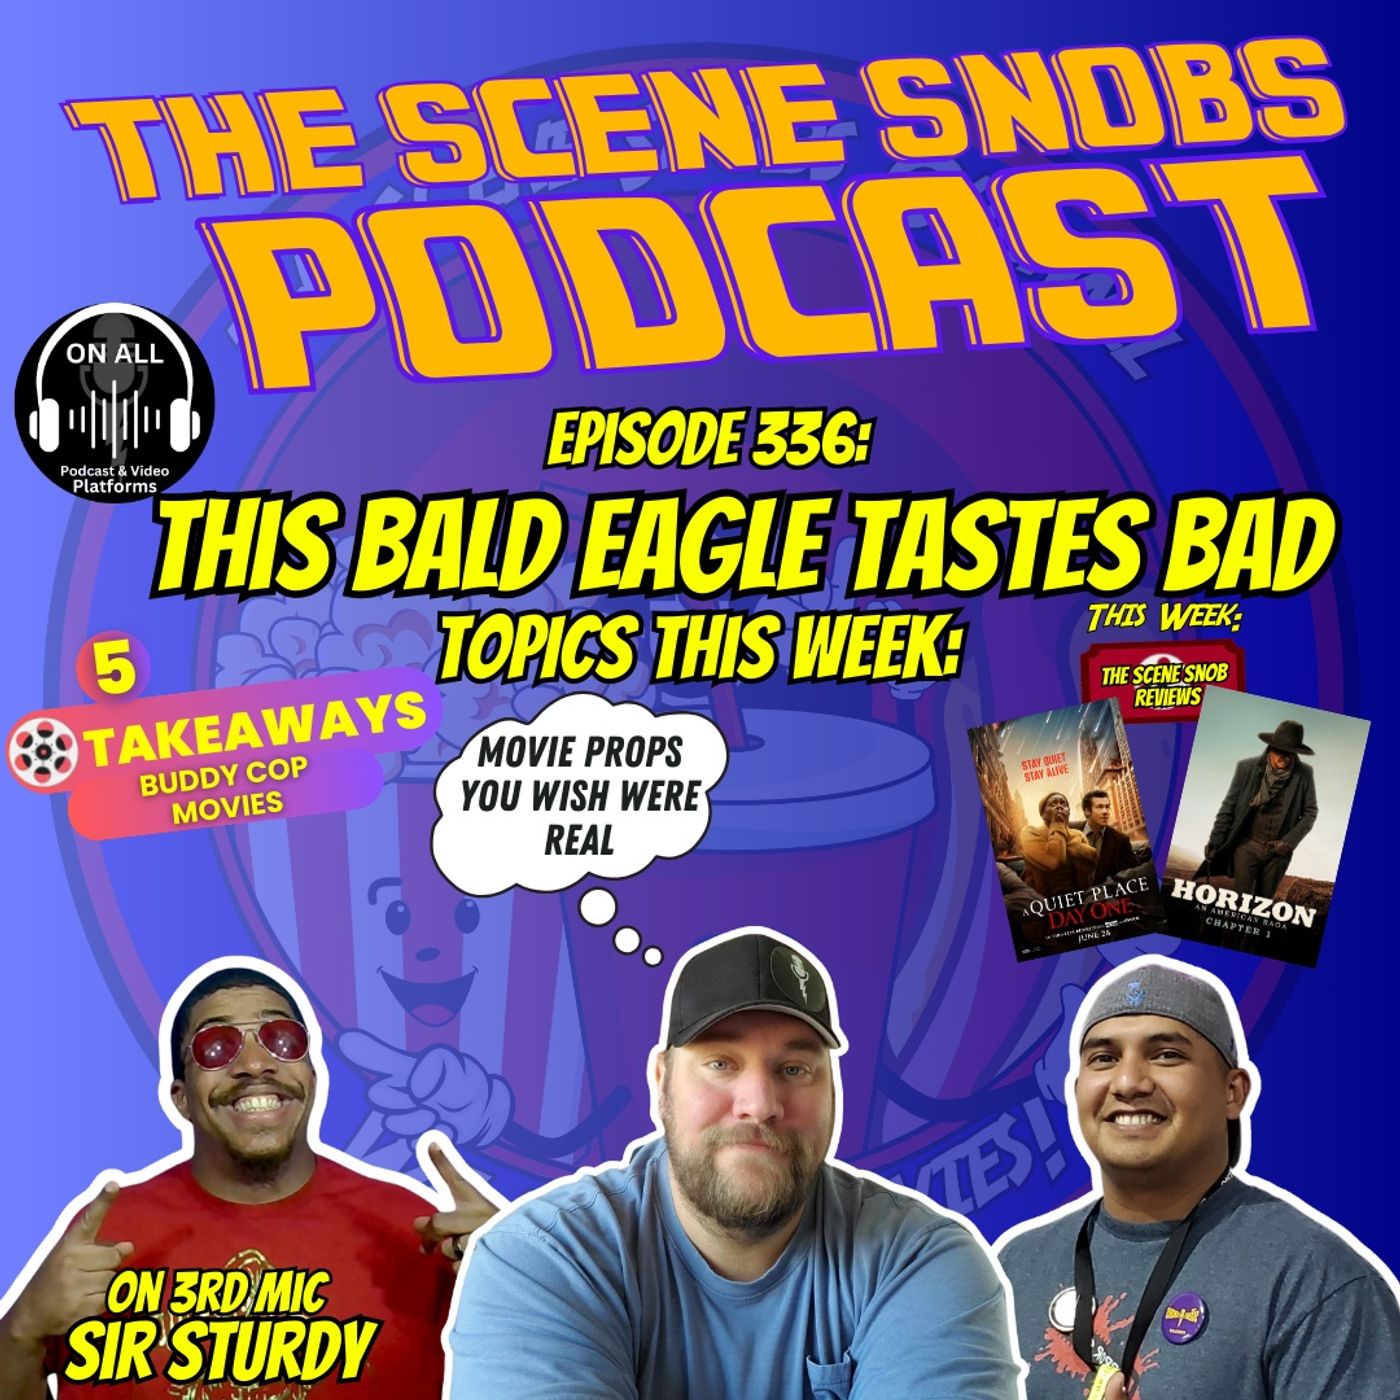 The Scene Snobs Podcast – This Bald Eagle Tastes Bad